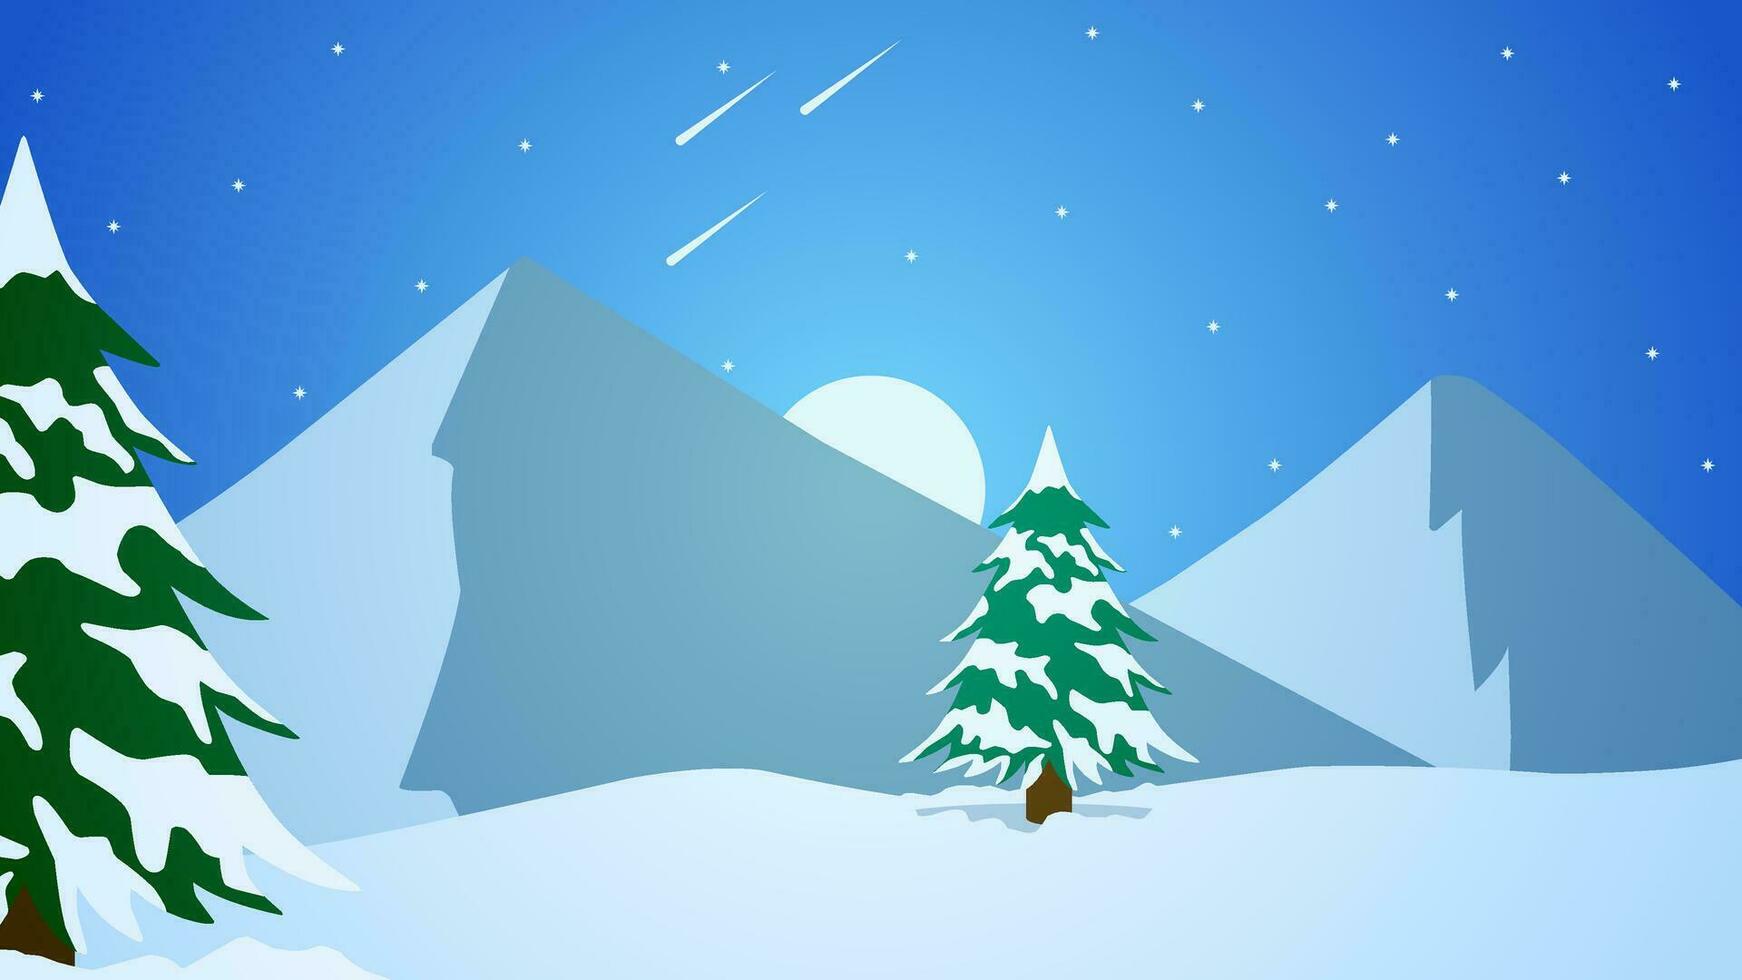 Snowy mountain landscape vector illustration. Scenery of snow covered mountain in winter season. Winter mountain panorama for illustration, background or wallpaper